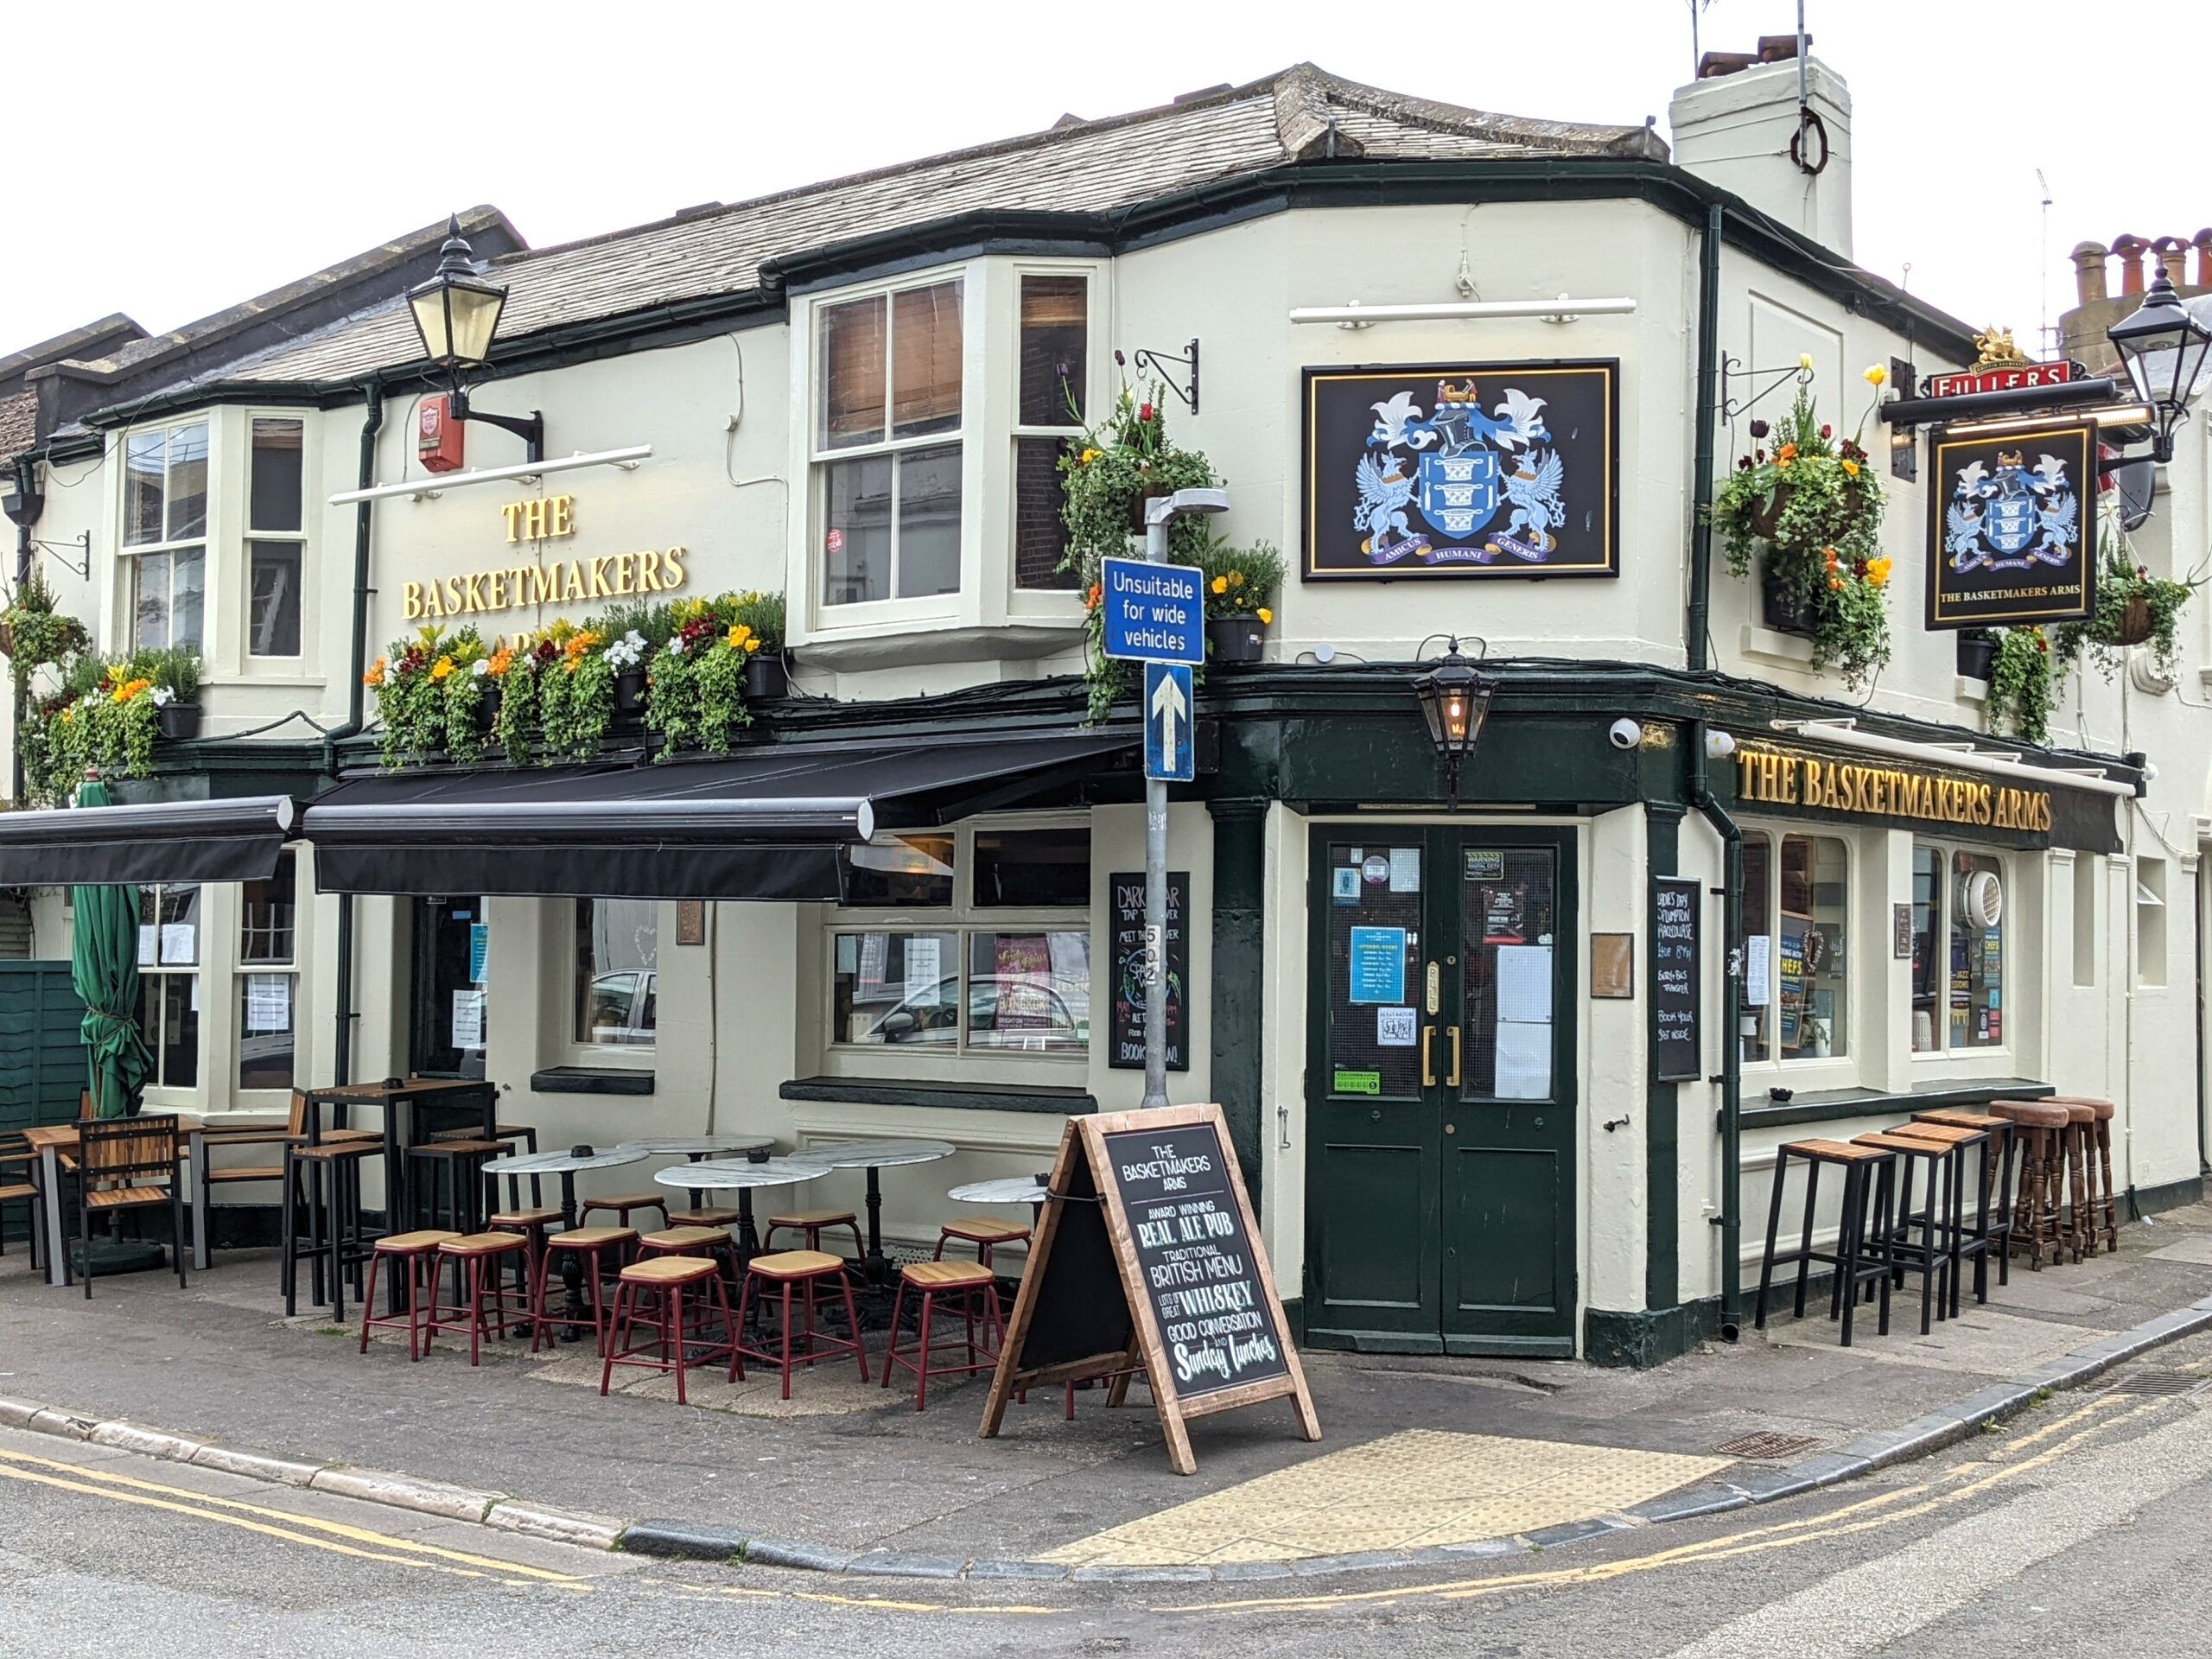 exterior of the basketmakers arms pub Brighton. Situated in the North Laine. It has a creamy white facade with black woodwor. the name of the pub is in gold. Tables and chairs are outside. 